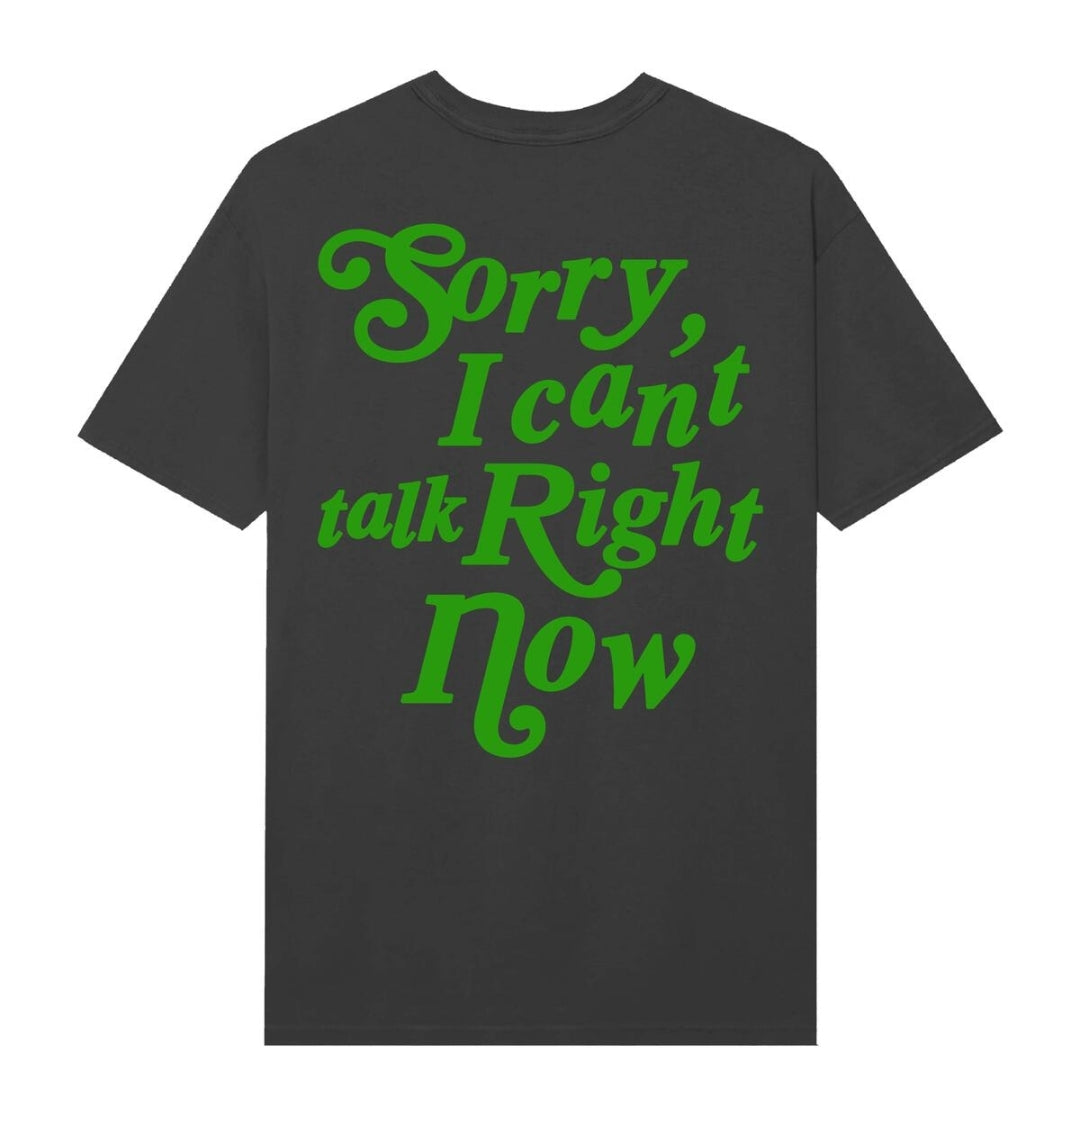 Auto Reply Sorry I Can't Talk Right Now T-shirt